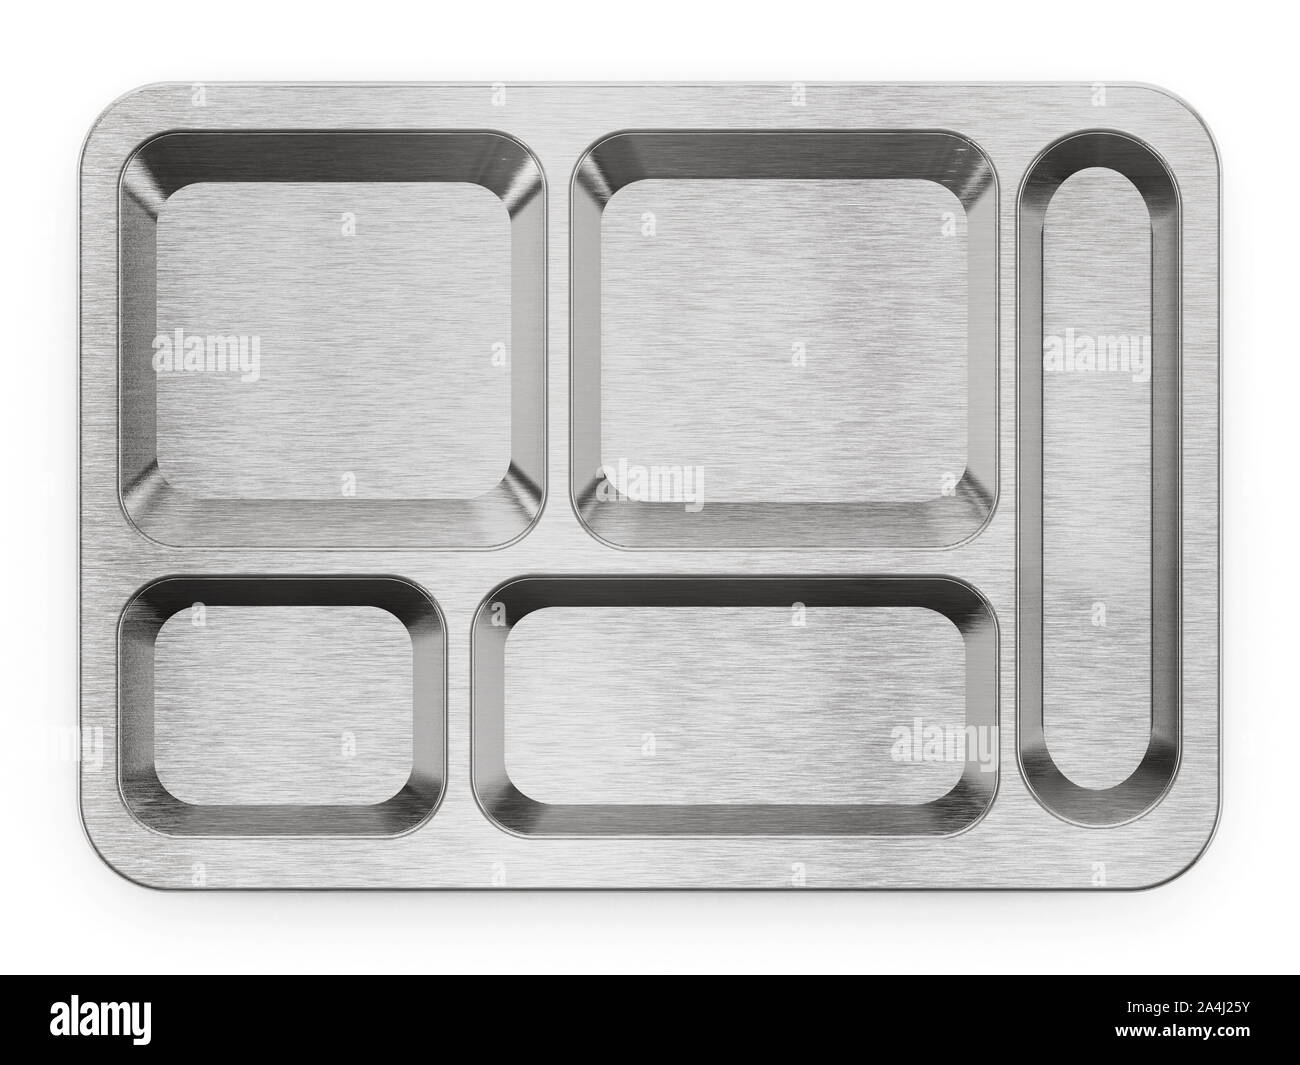 Metal table d'hote tray isolated on white background. 3D illustration. Stock Photo